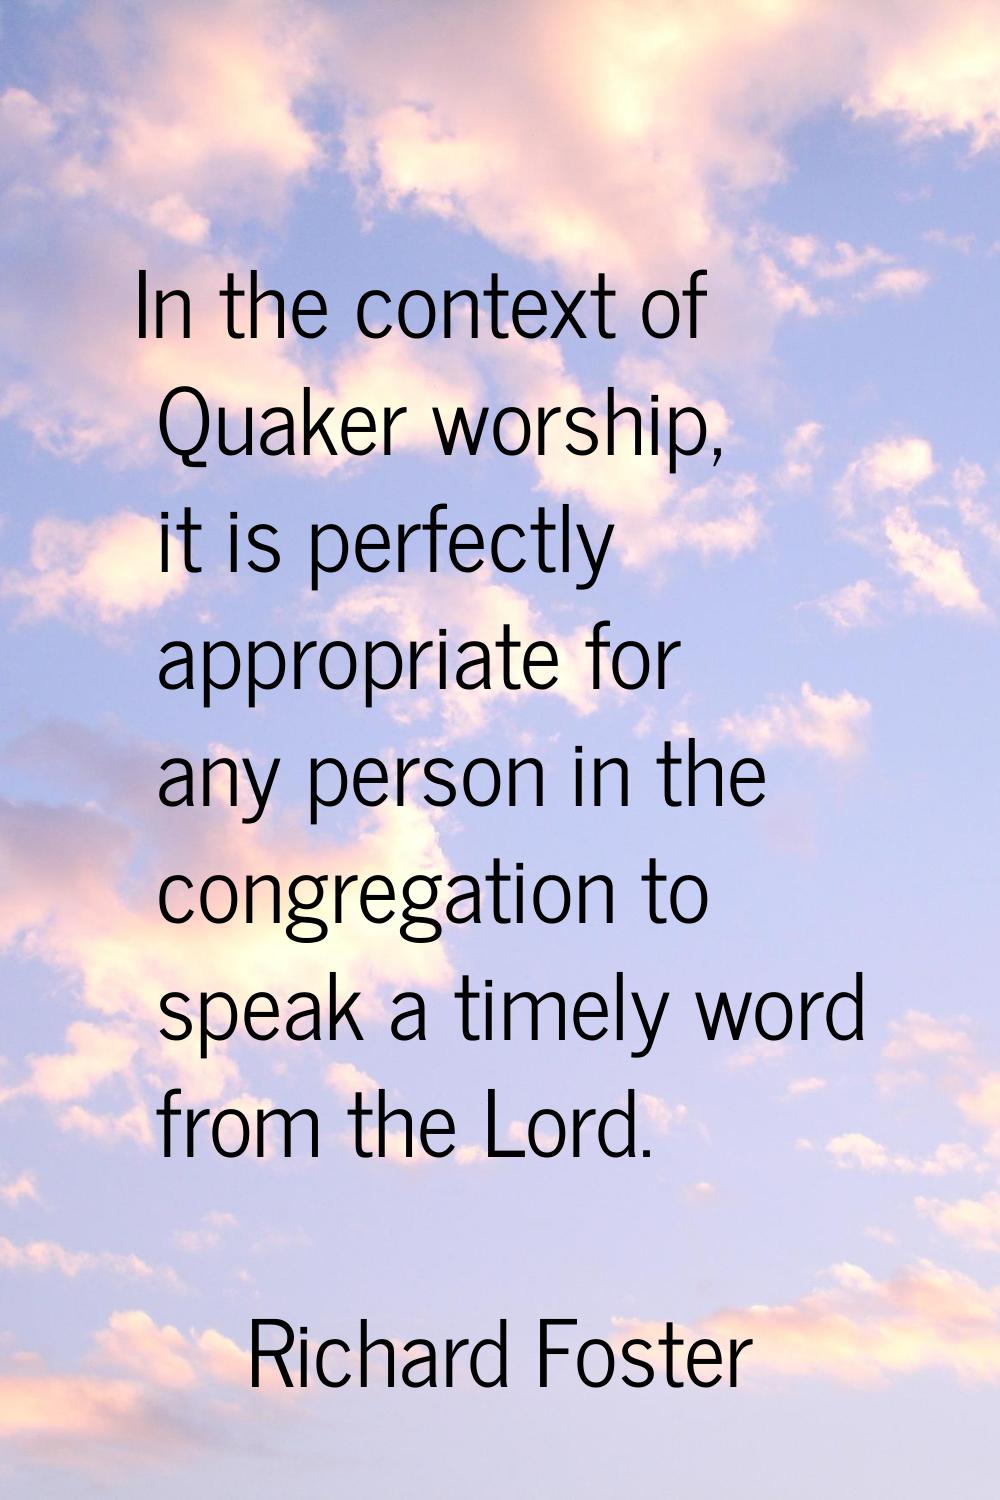 In the context of Quaker worship, it is perfectly appropriate for any person in the congregation to